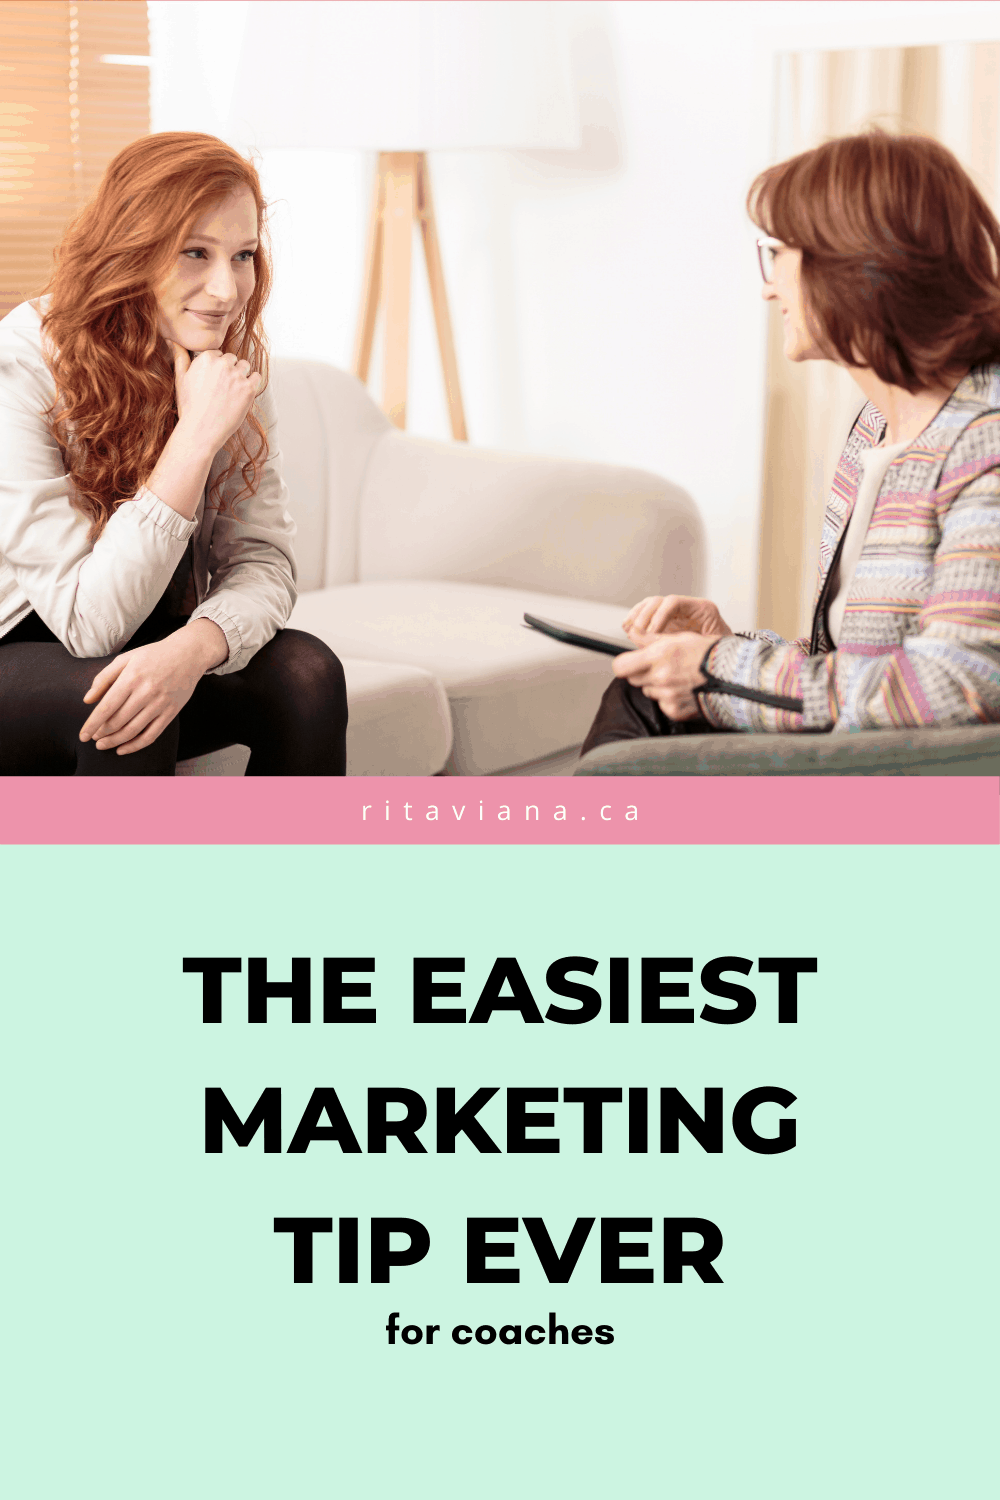 THE EASIEST MARKETING TIP EVER